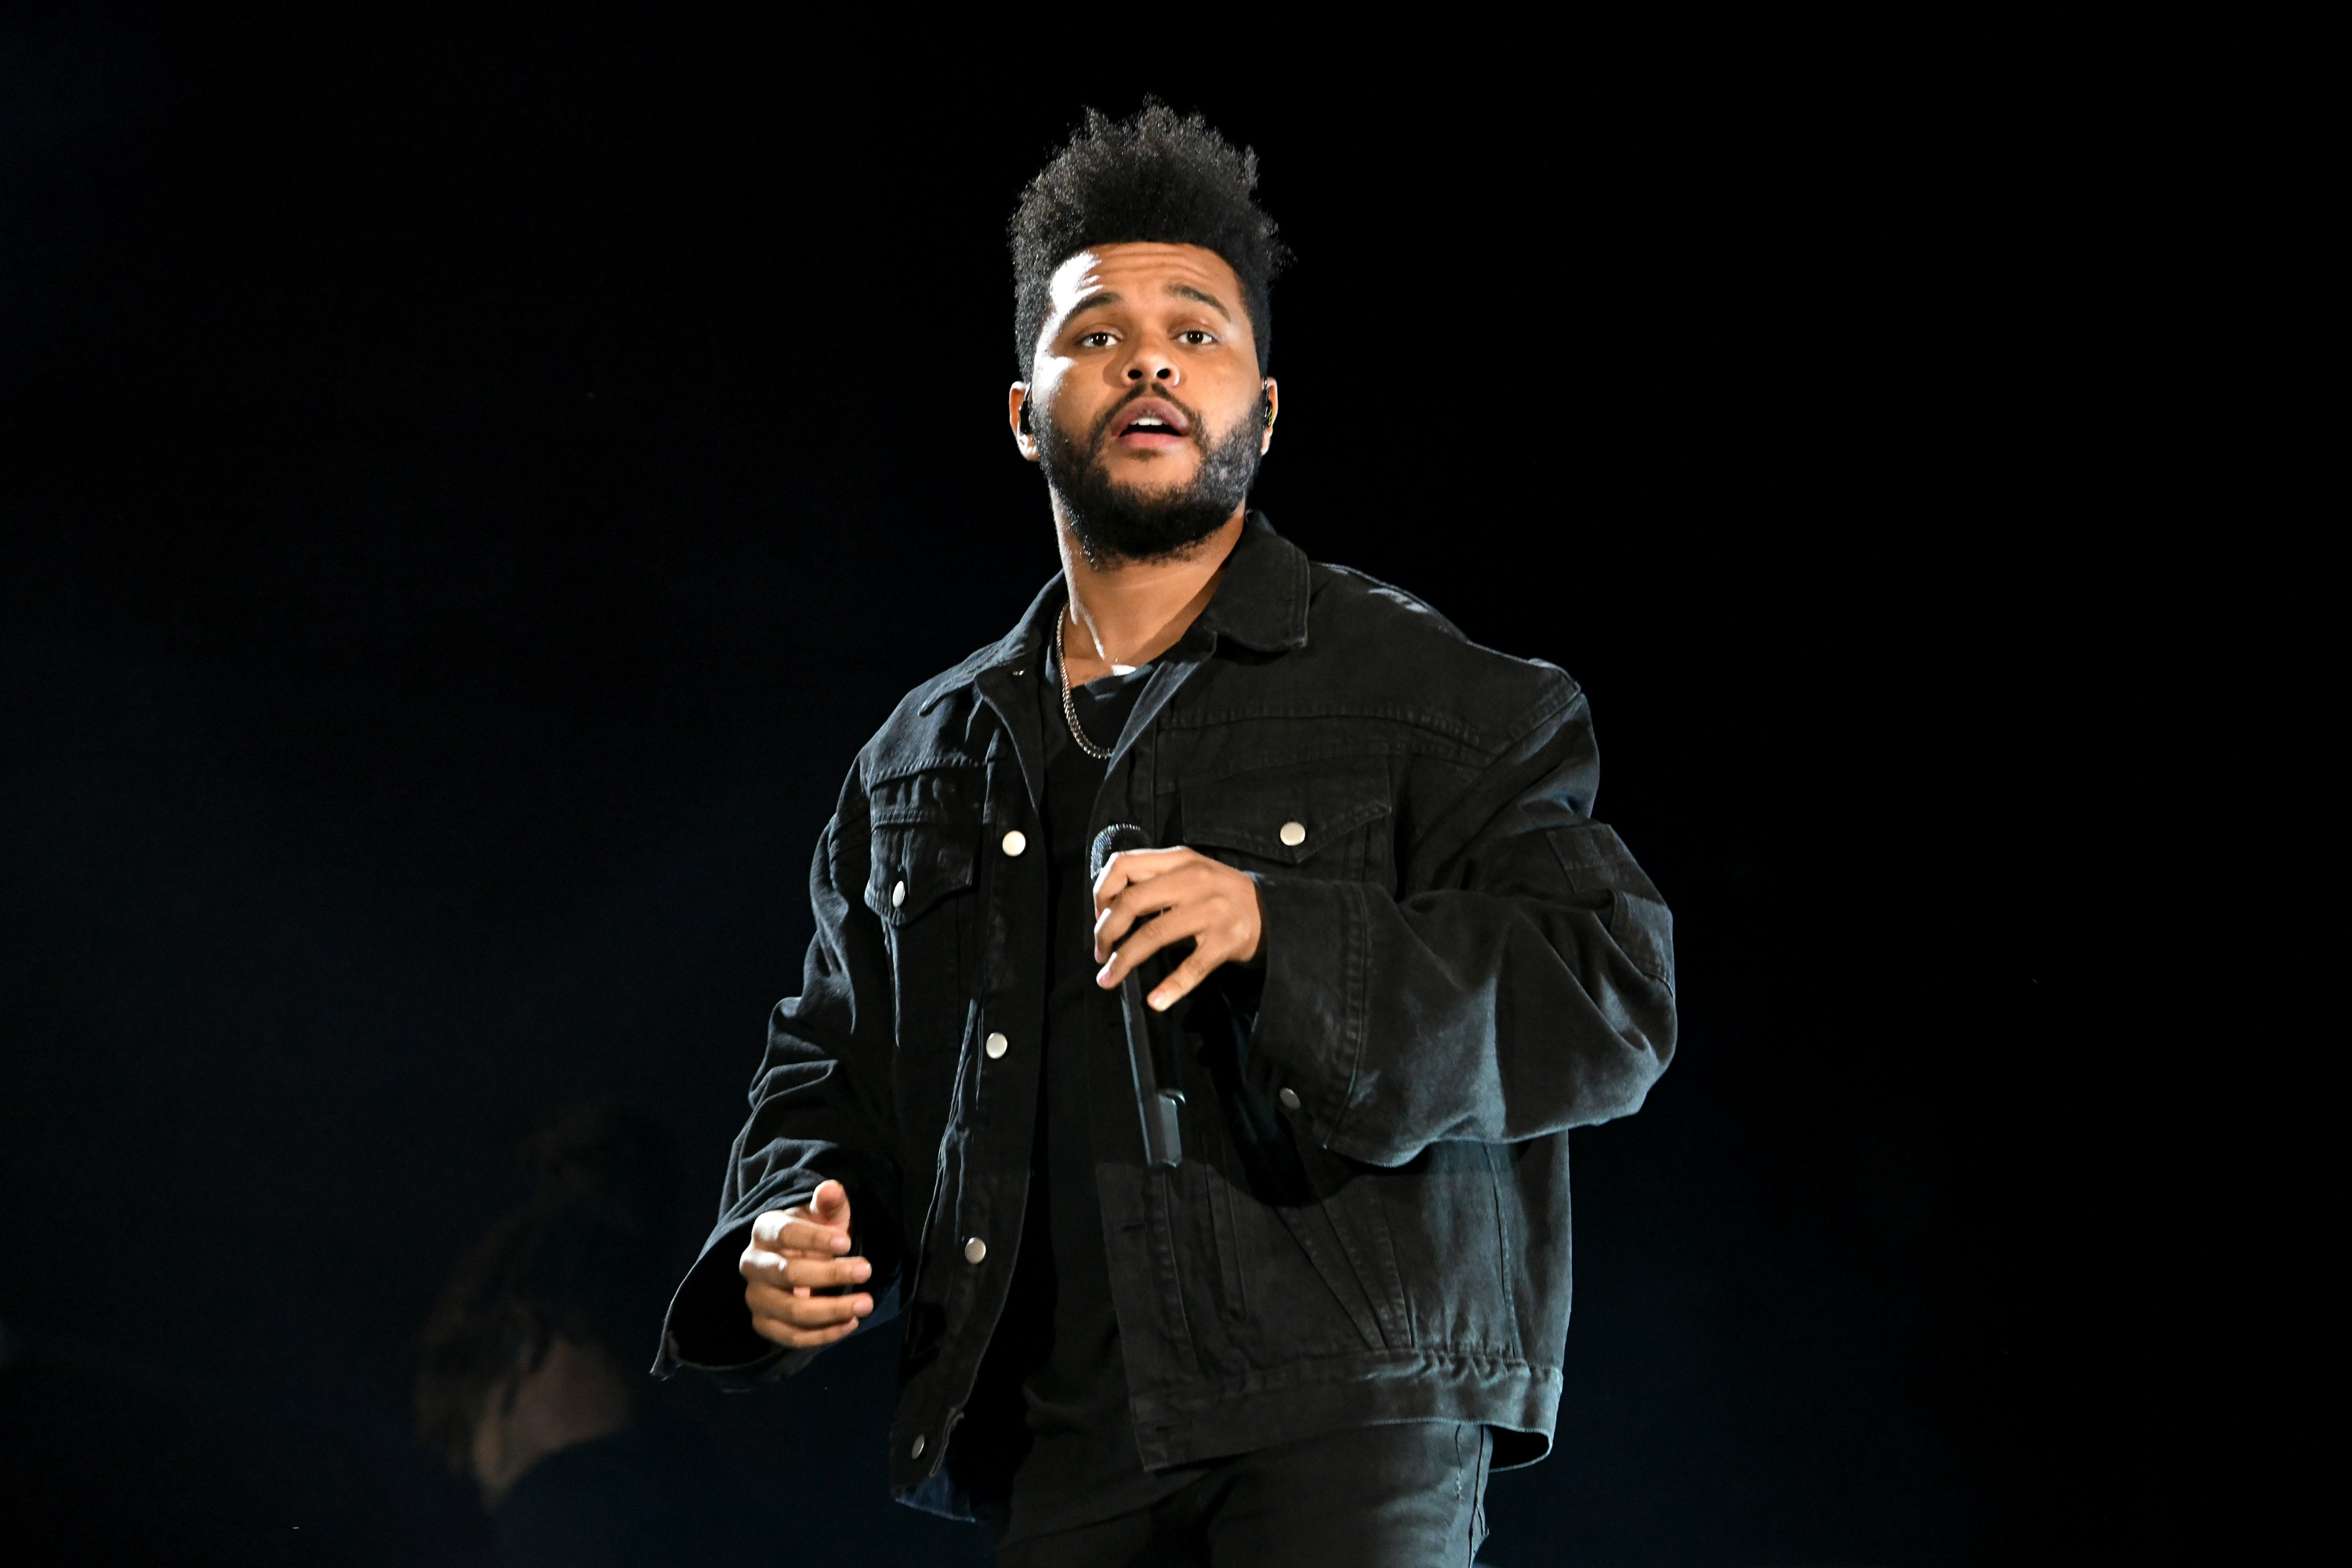 Singer The Weeknd performs onstage during the 2018 Global Citizen Concert